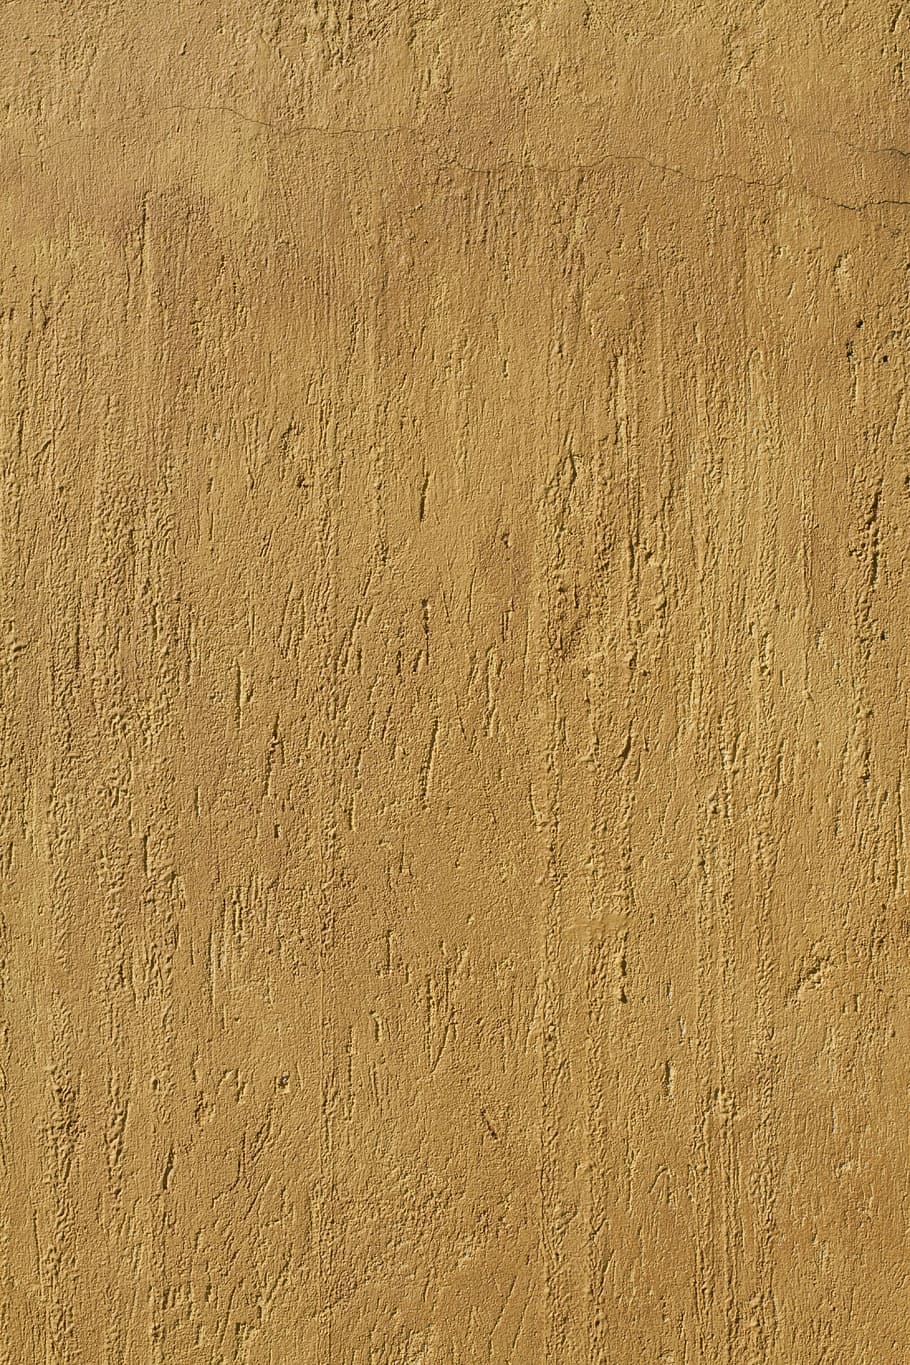 brown concrete wall, vertical texture, plastering, wall, backgrounds, textured, pattern, nature, abstract, full frame